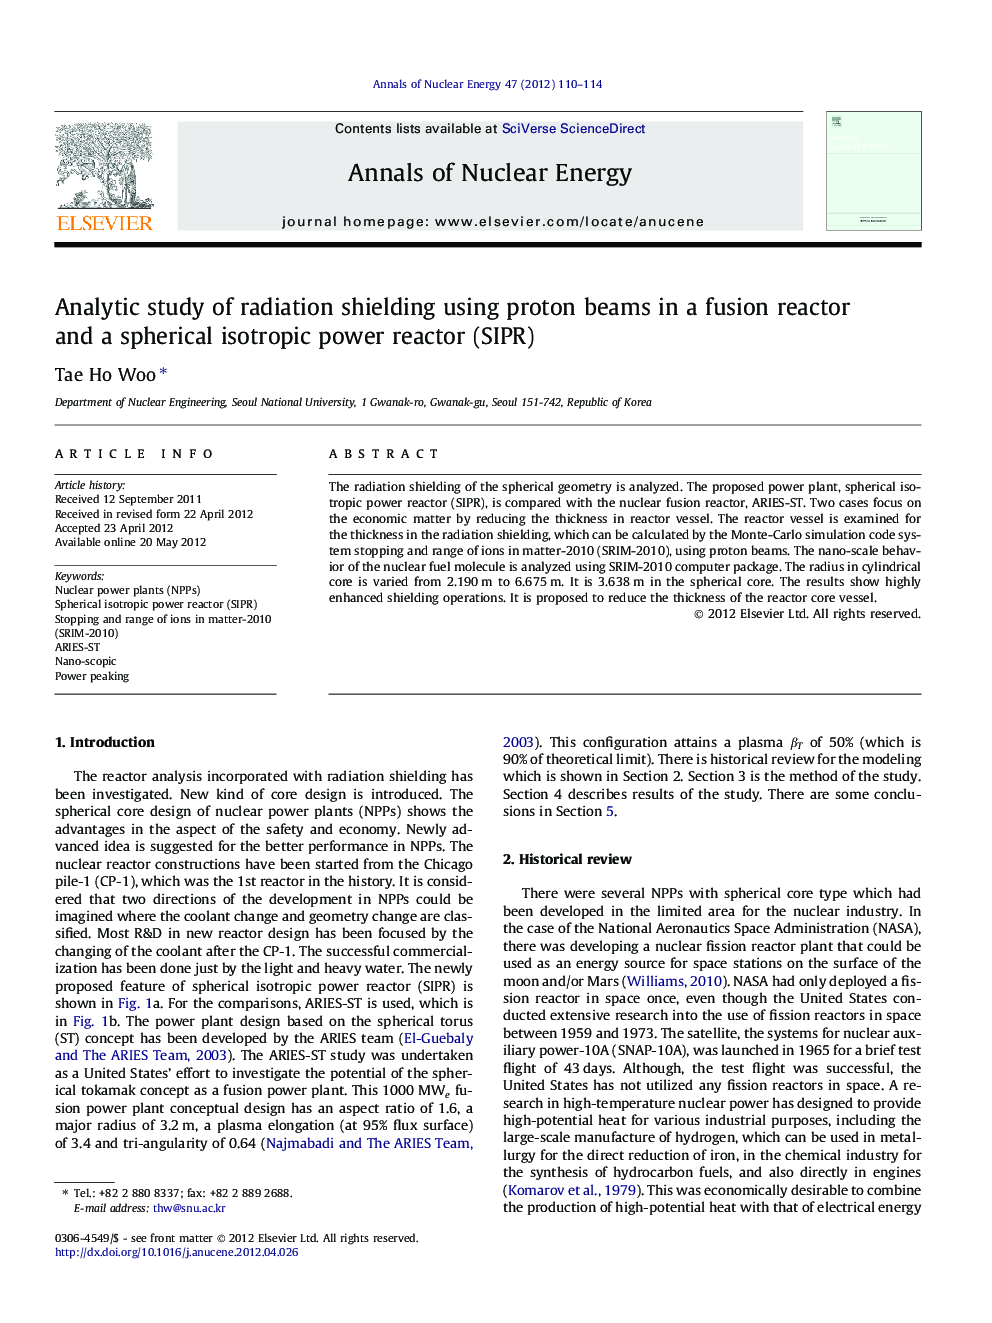 Analytic study of radiation shielding using proton beams in a fusion reactor and a spherical isotropic power reactor (SIPR)